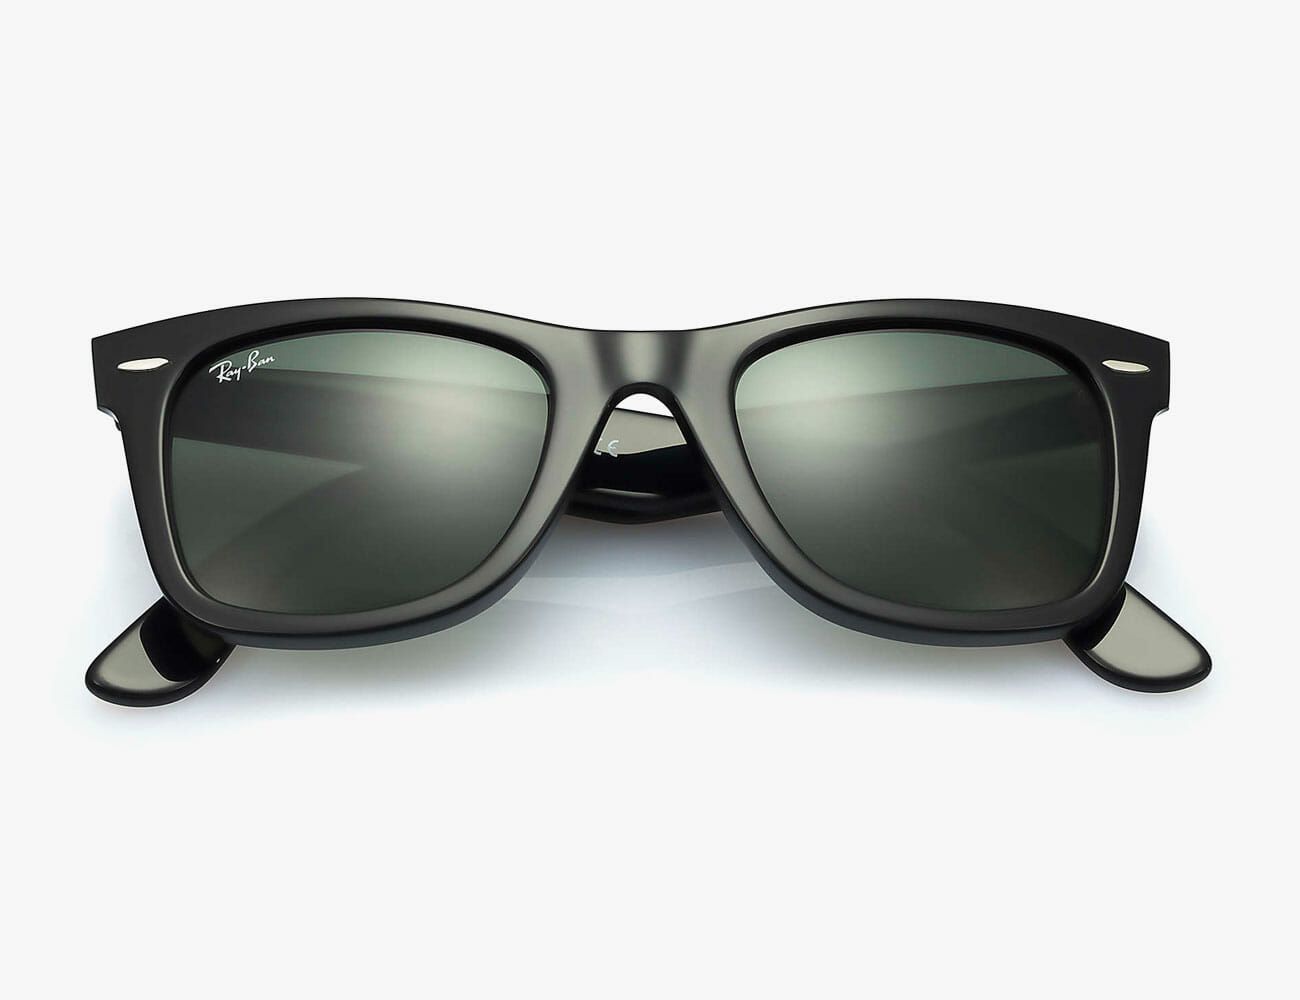 price for ray ban sunglasses